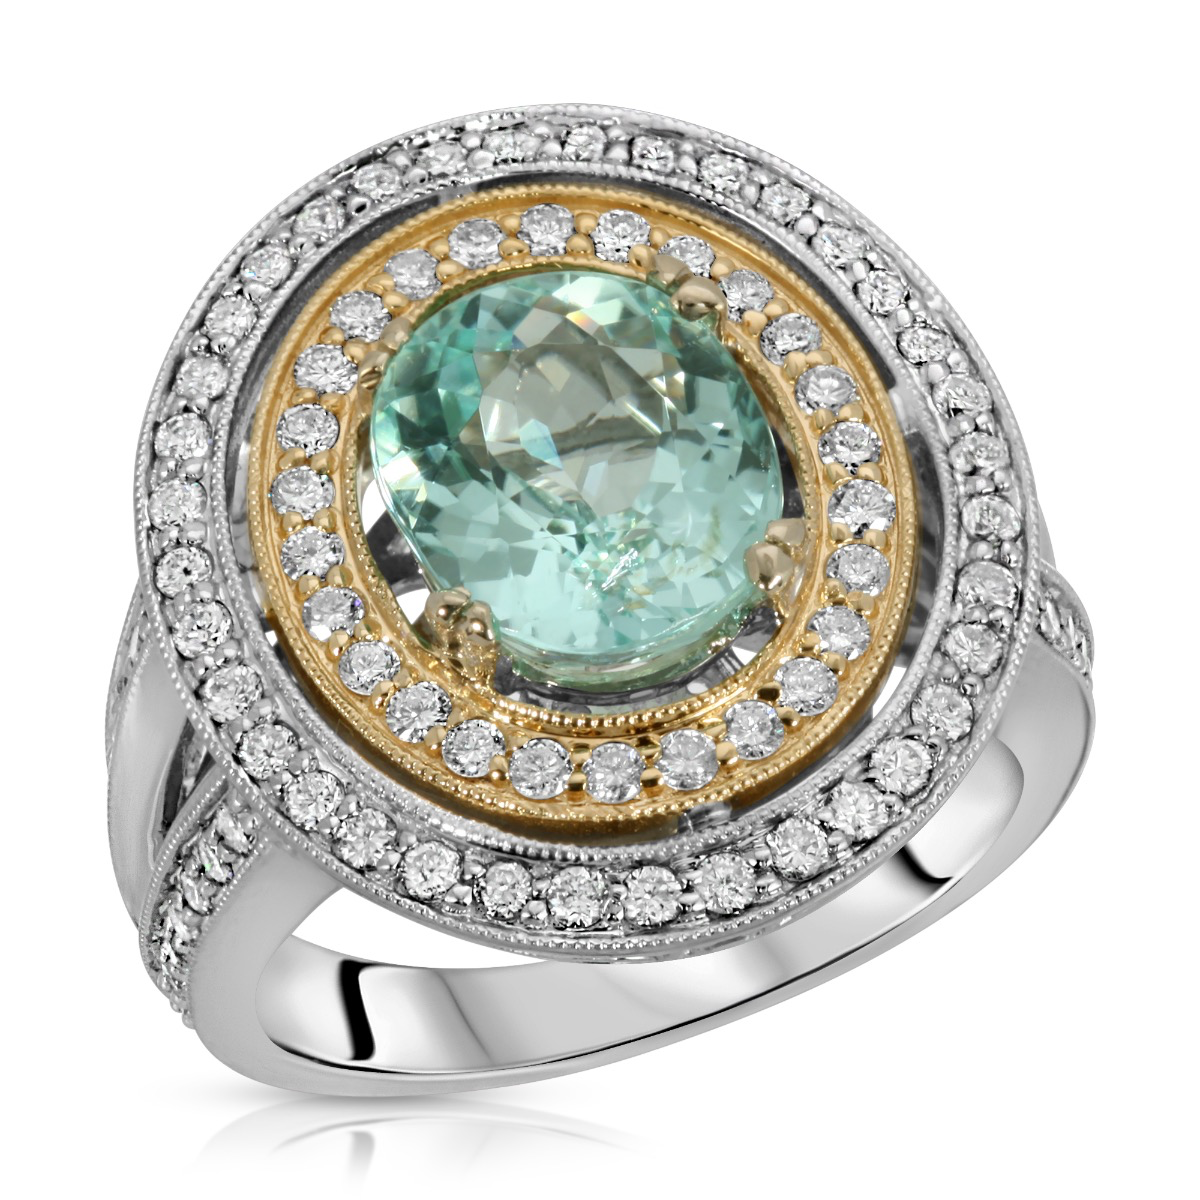 Natural Paraiba Tourmaline 2.89 Carats Set in 14K White Gold and Yellow Gold Ring With Diamonds GIA Report